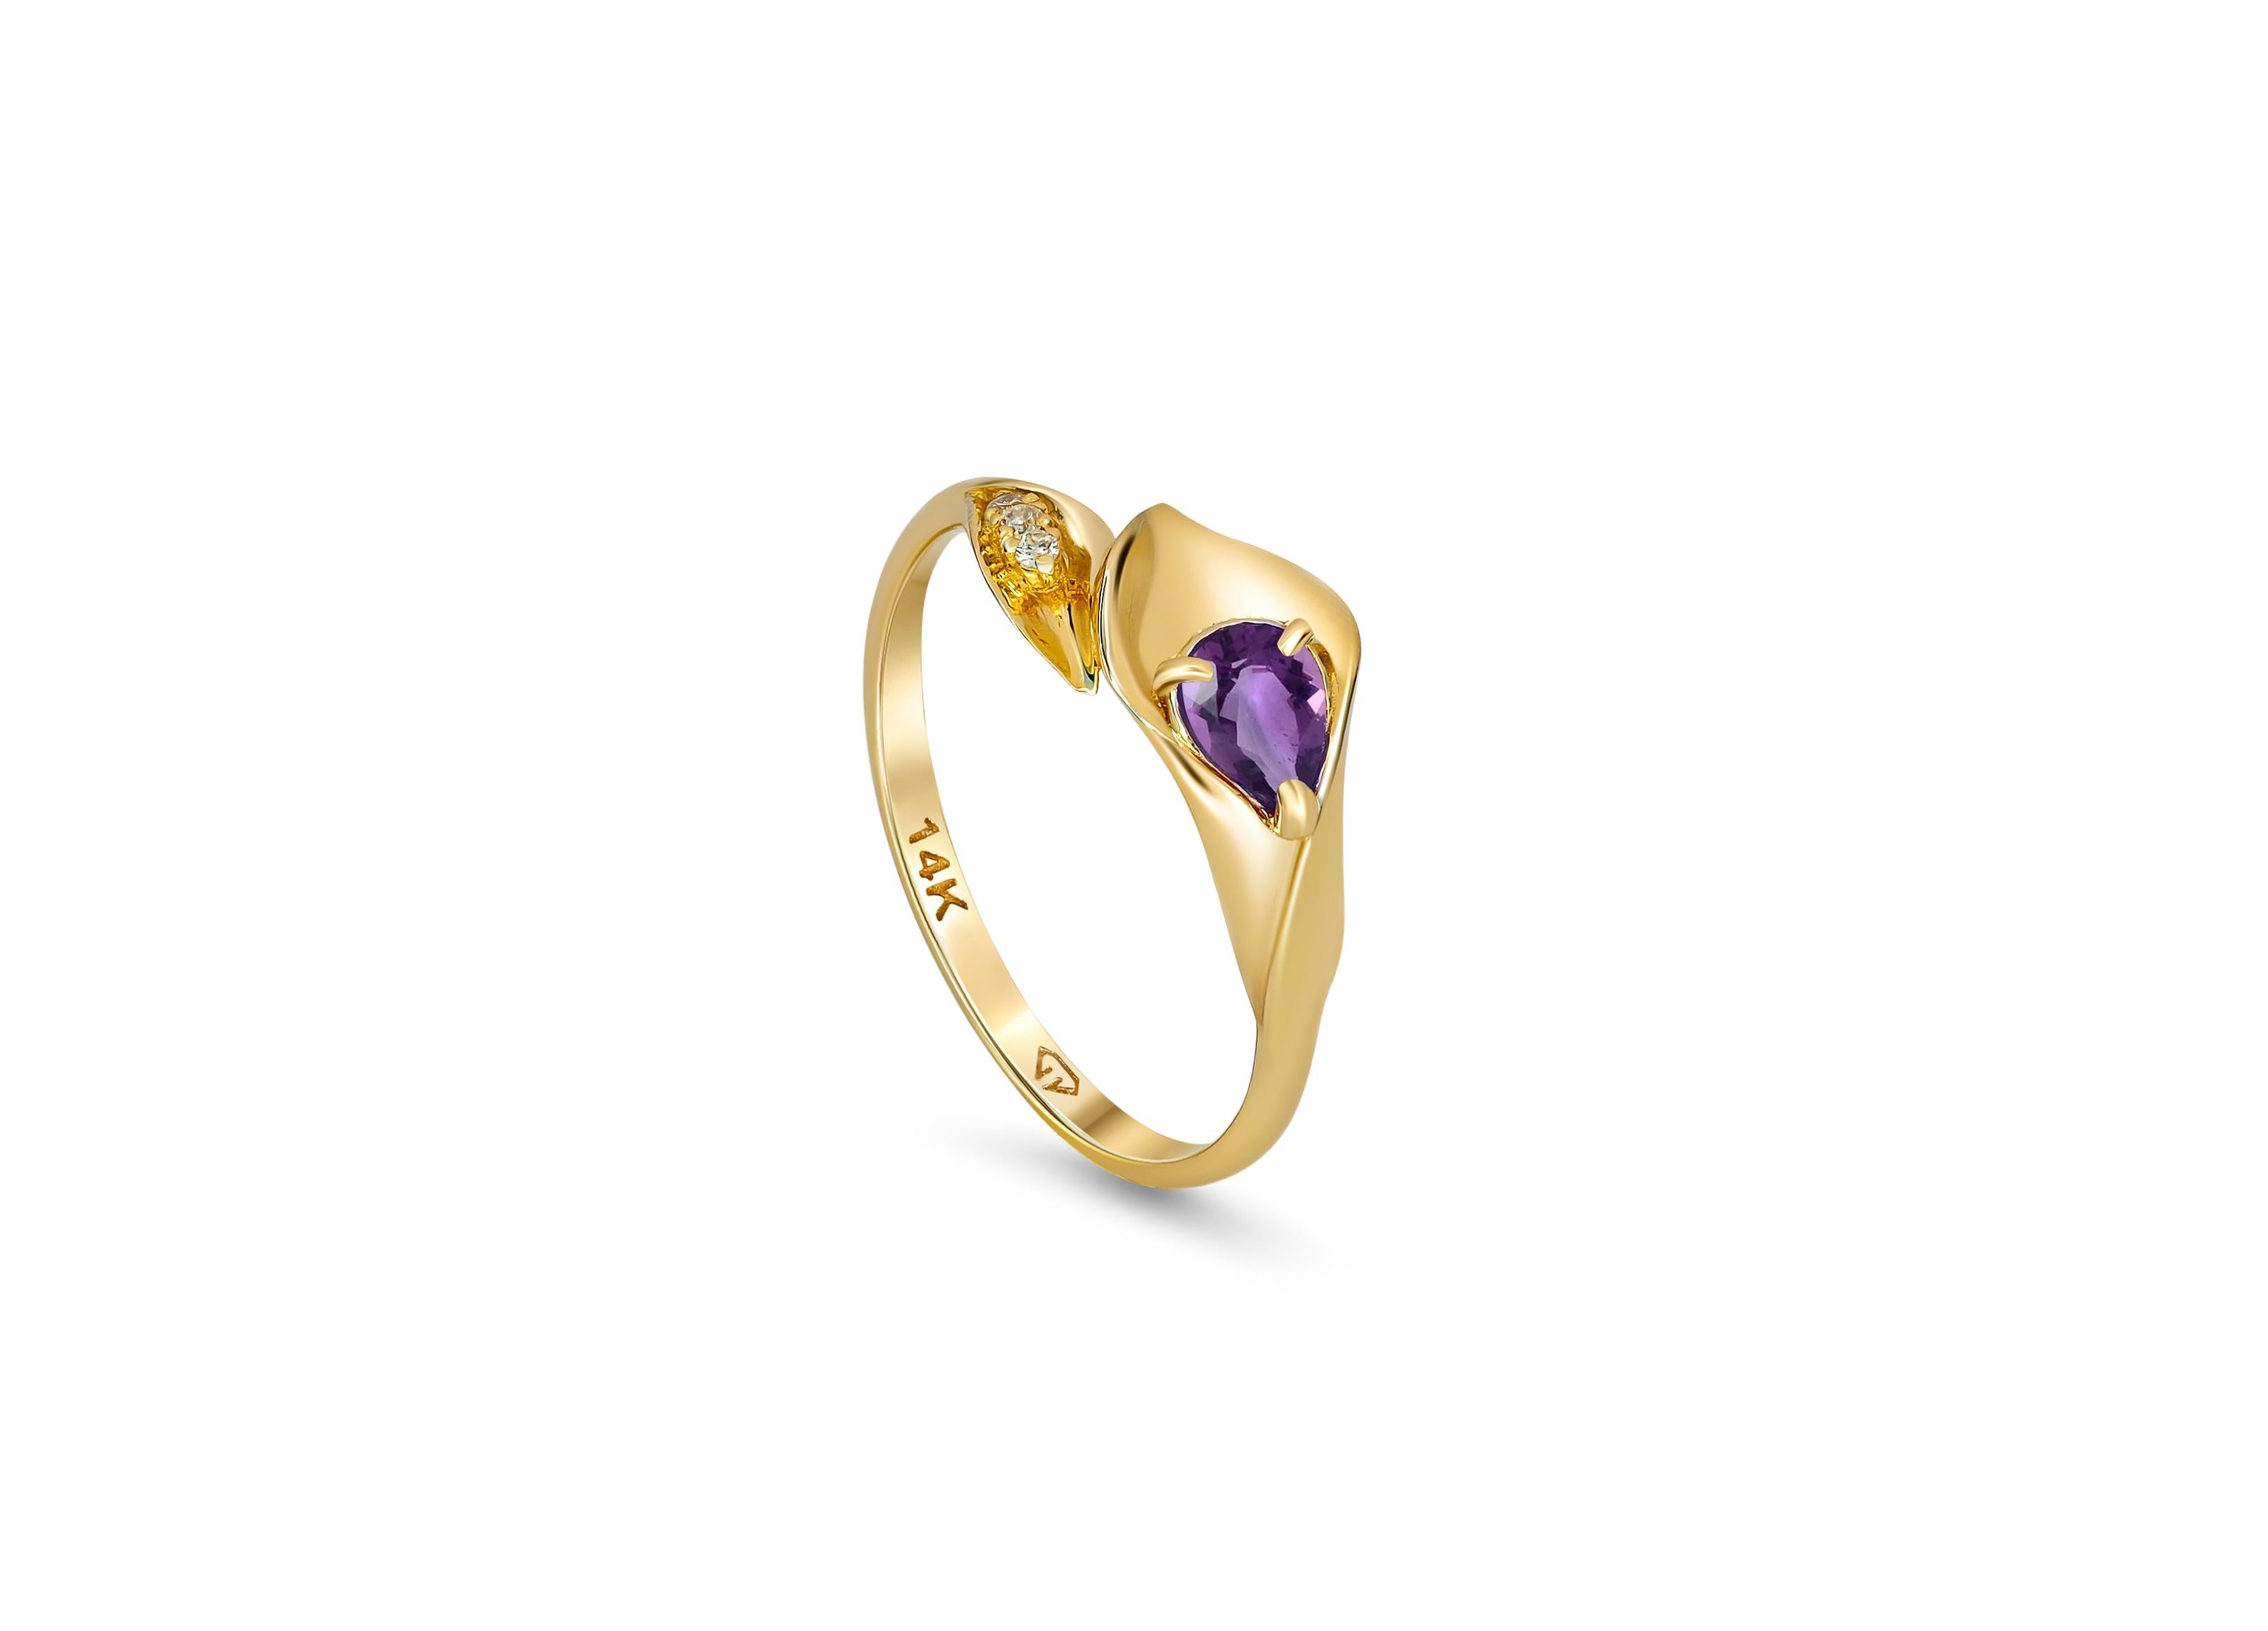 Lily calla gold ring. 
14 kt gold ring with amethyst and diamonds. Pear amethyst gold ring. Flower gold ring.

Metal: 14k gold
Weight: 1.8 g. depends from size

Set with amethyst 
Pear cut, 0.70 ct.
Purple color
Clarity: Transparent with inclusions
